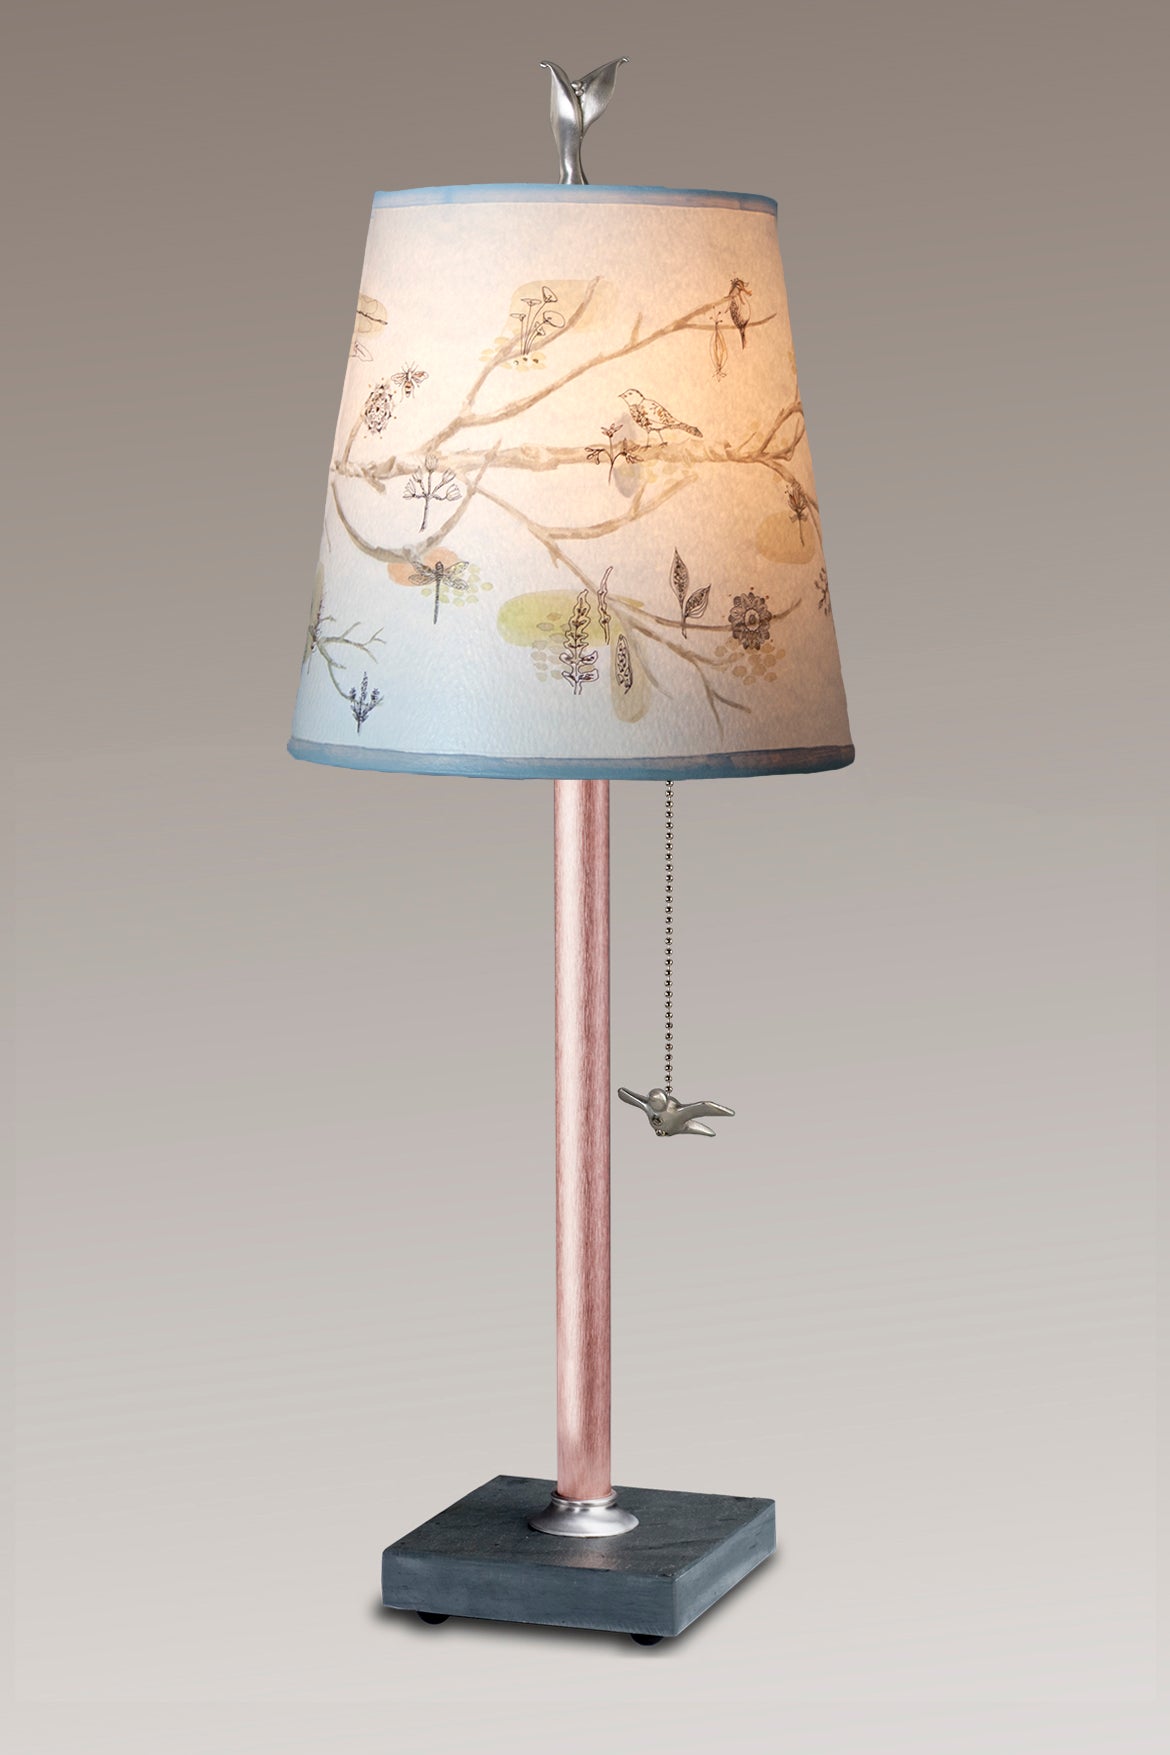 Janna Ugone &amp; Co Table Lamps Copper Table Lamp with Small Drum Shade in Artful Branch